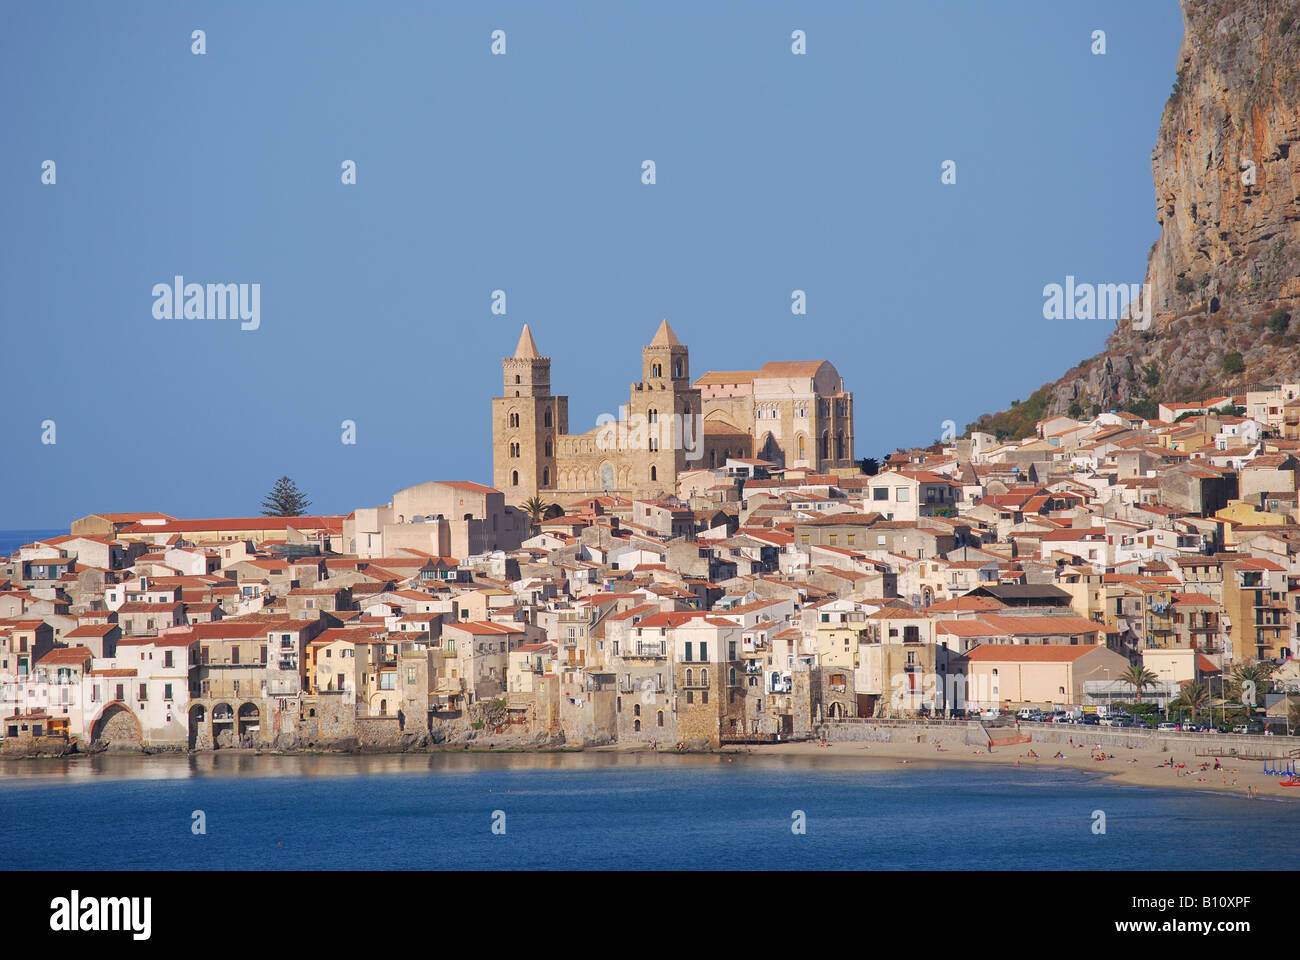 View of city and coast, Cefalu, Palermo Province, Sicily, Italy Stock Photo